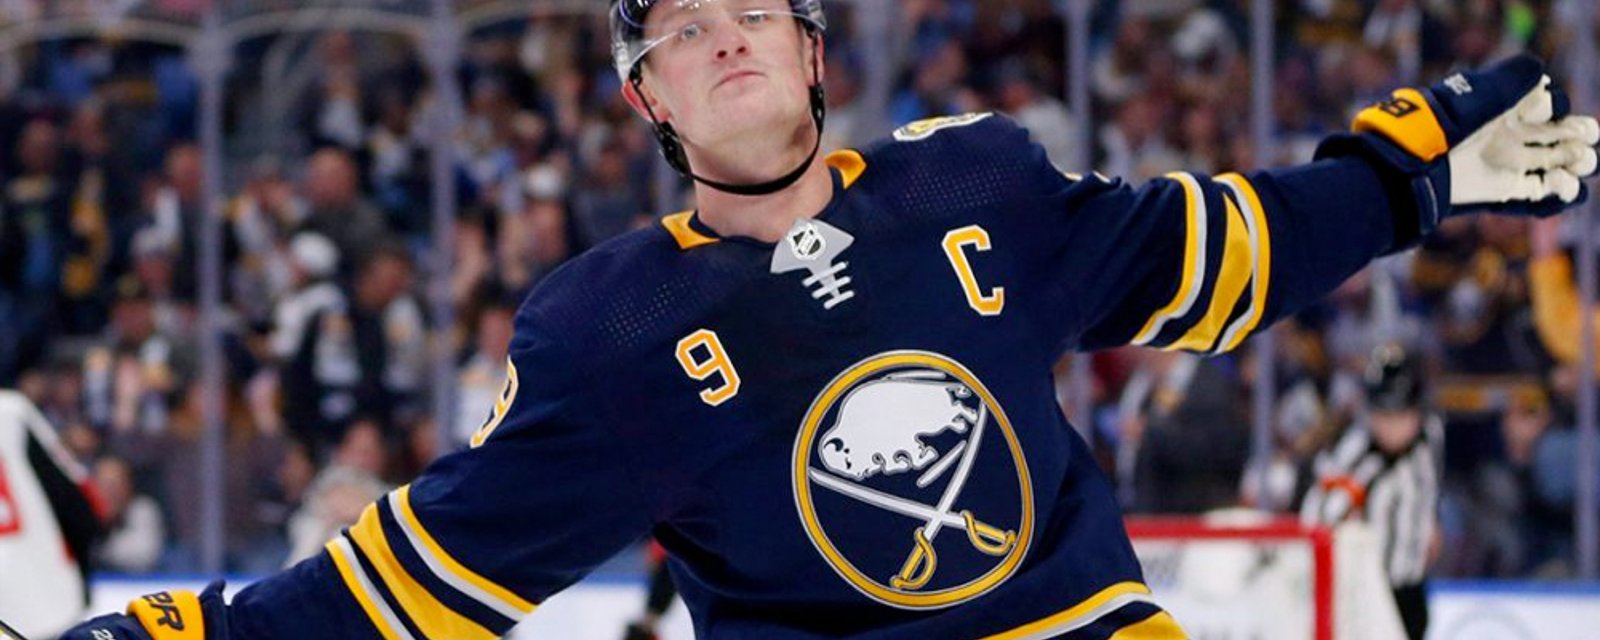 The price to acquire Jack Eichel revealed